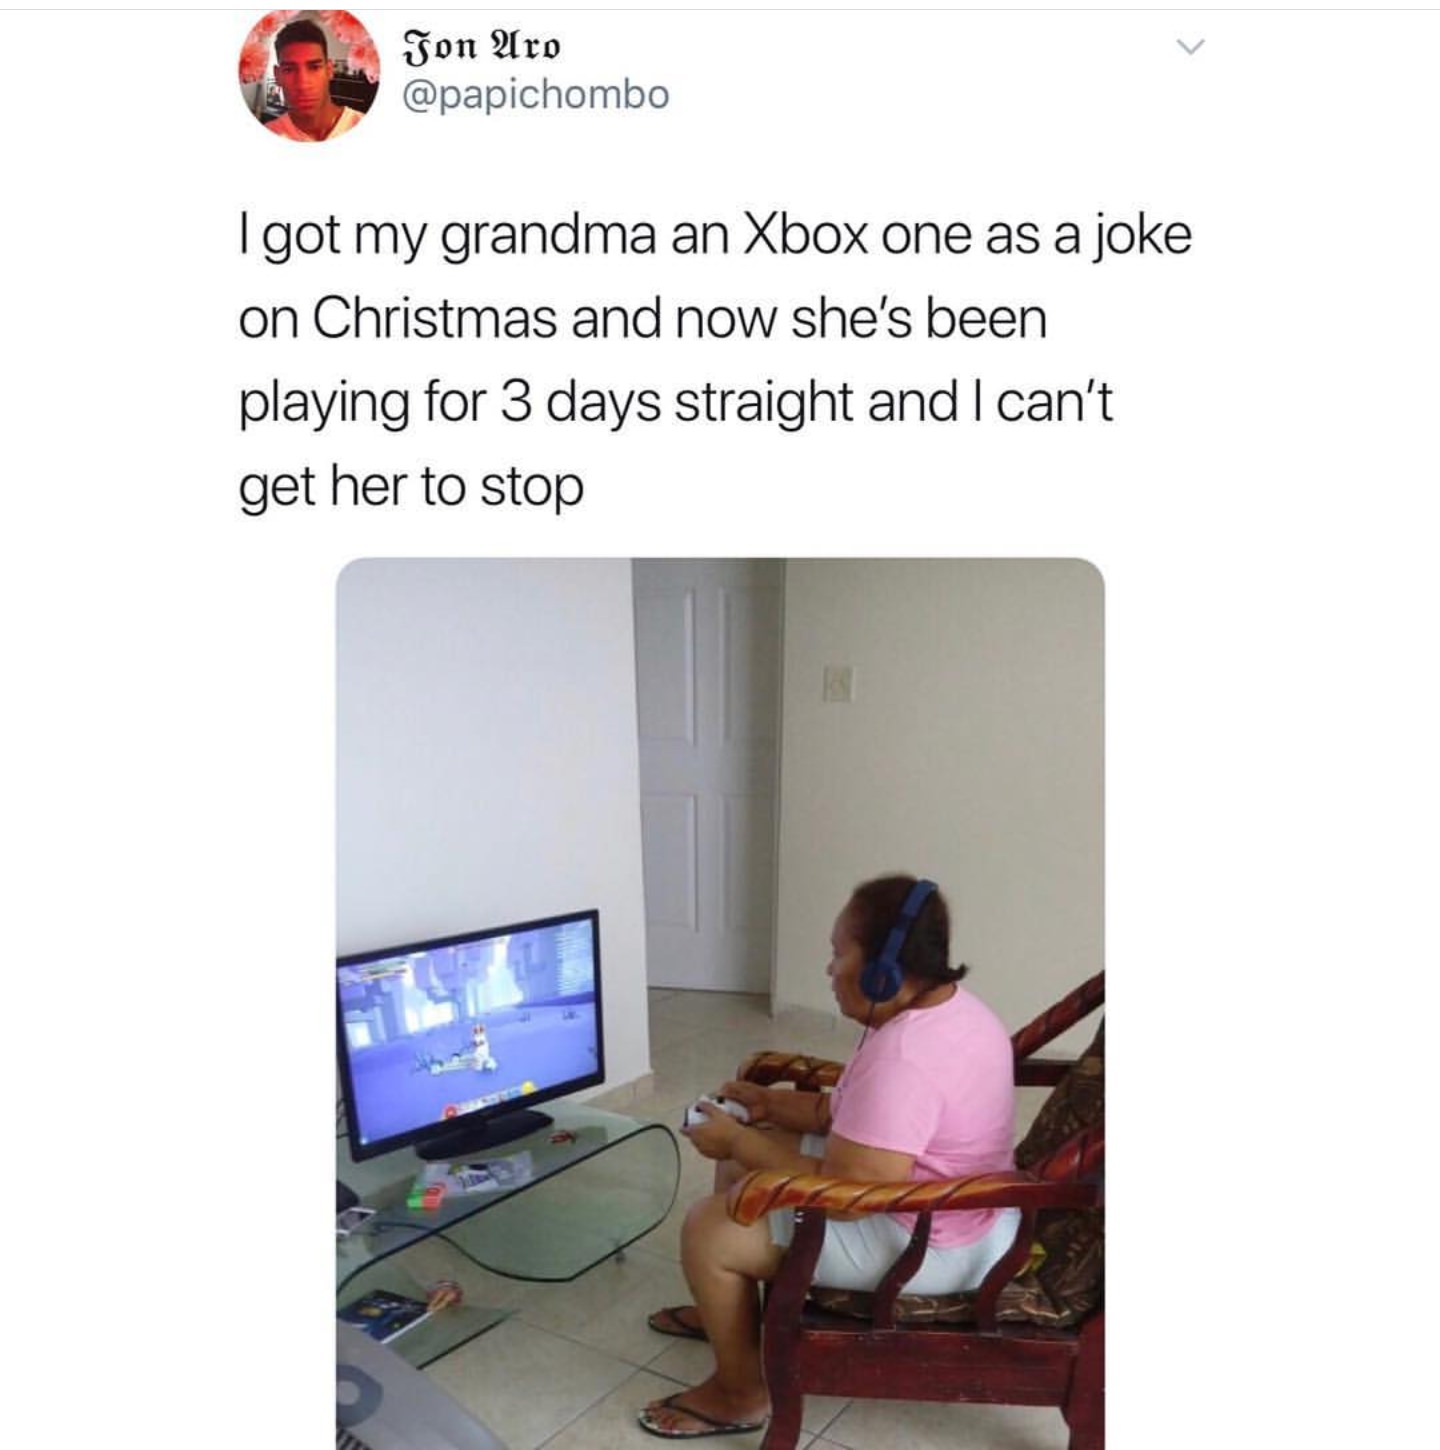 jokes that my grandma will get - Jon Aro I got my grandma an Xbox one as a joke on Christmas and now she's been playing for 3 days straight and I can't get her to stop